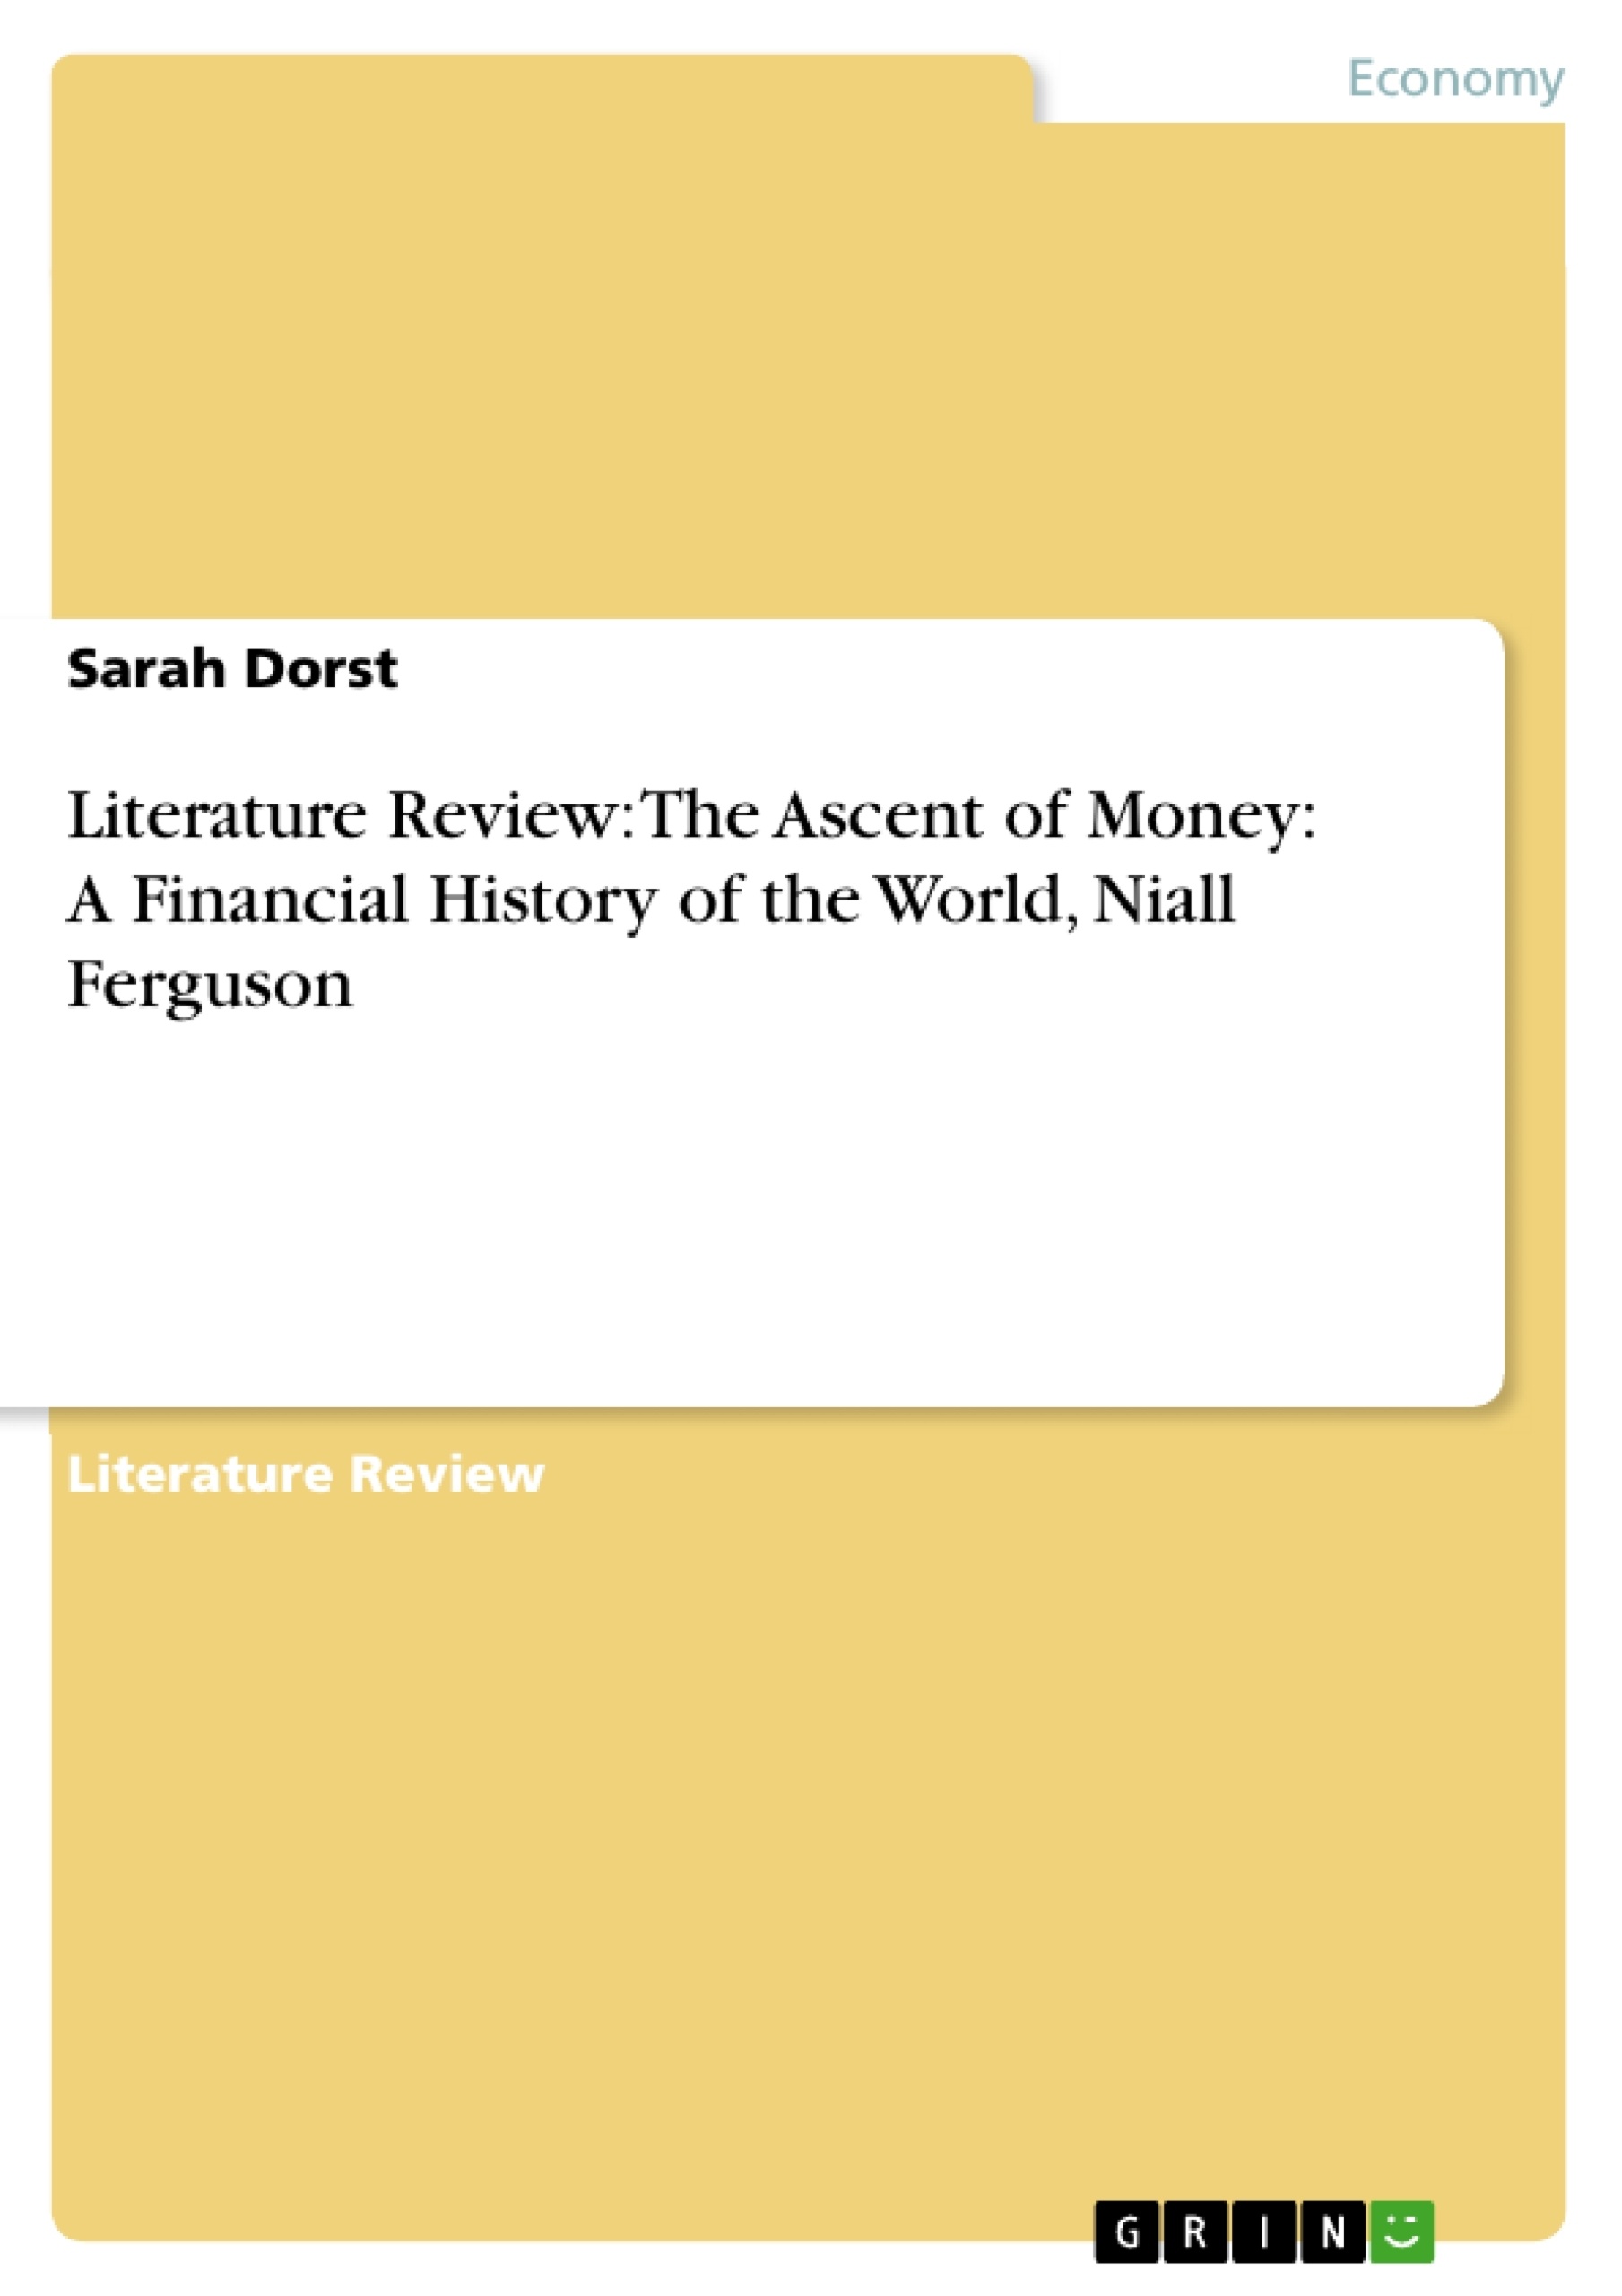 Titre: Literature Review: The Ascent of Money: A Financial History of the World, Niall Ferguson